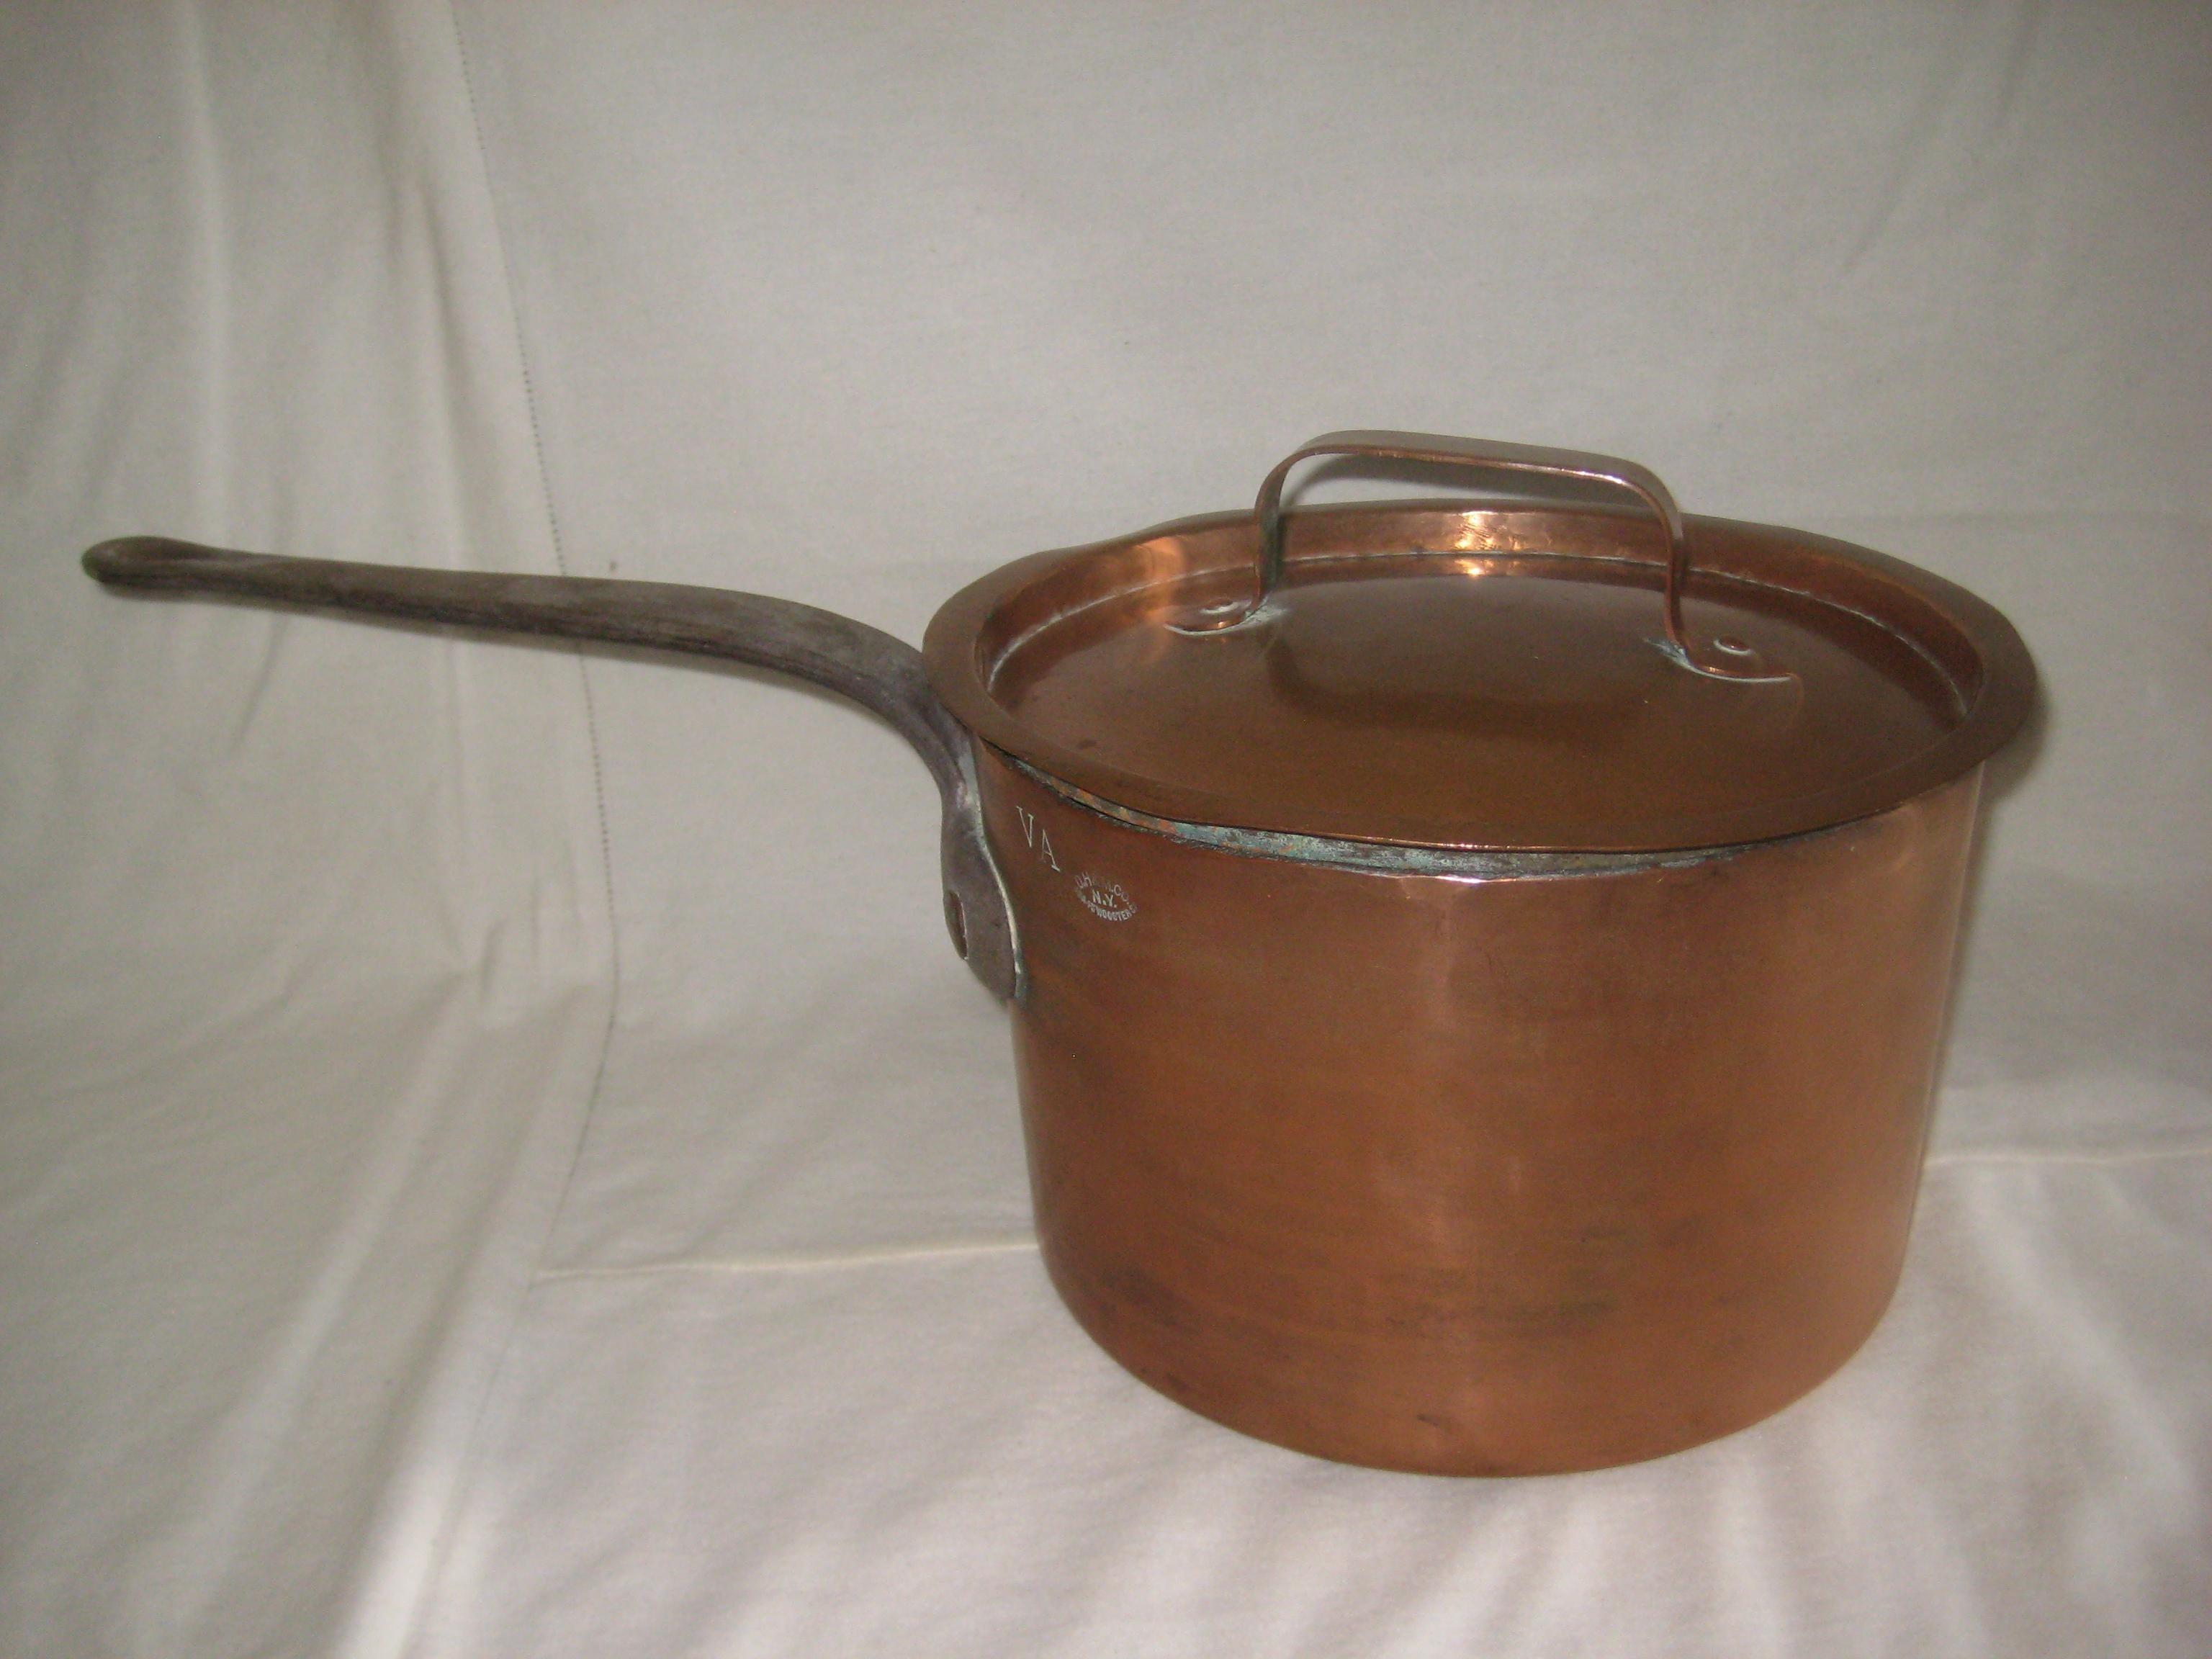 Lovely 9 inch Copper Saucepan and accompanying lid, made by DH&M, Duparquet, New York N.Y., 43-45 Wooster Street, 

According to vintagefrenchcopper's website:
